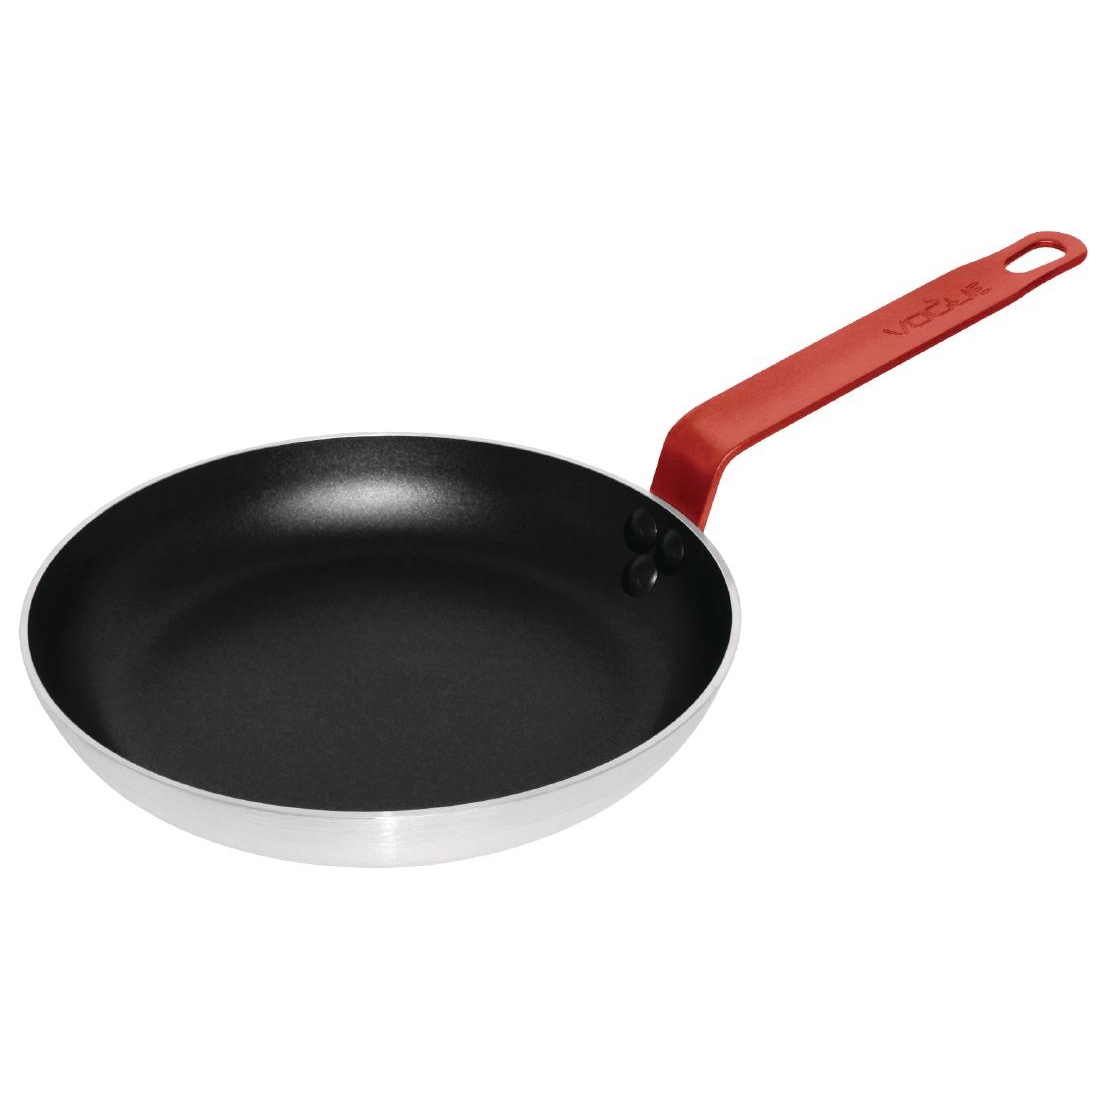 Vogue Non Stick Teflon Aluminium Frying Pan with Red Handle 240mm